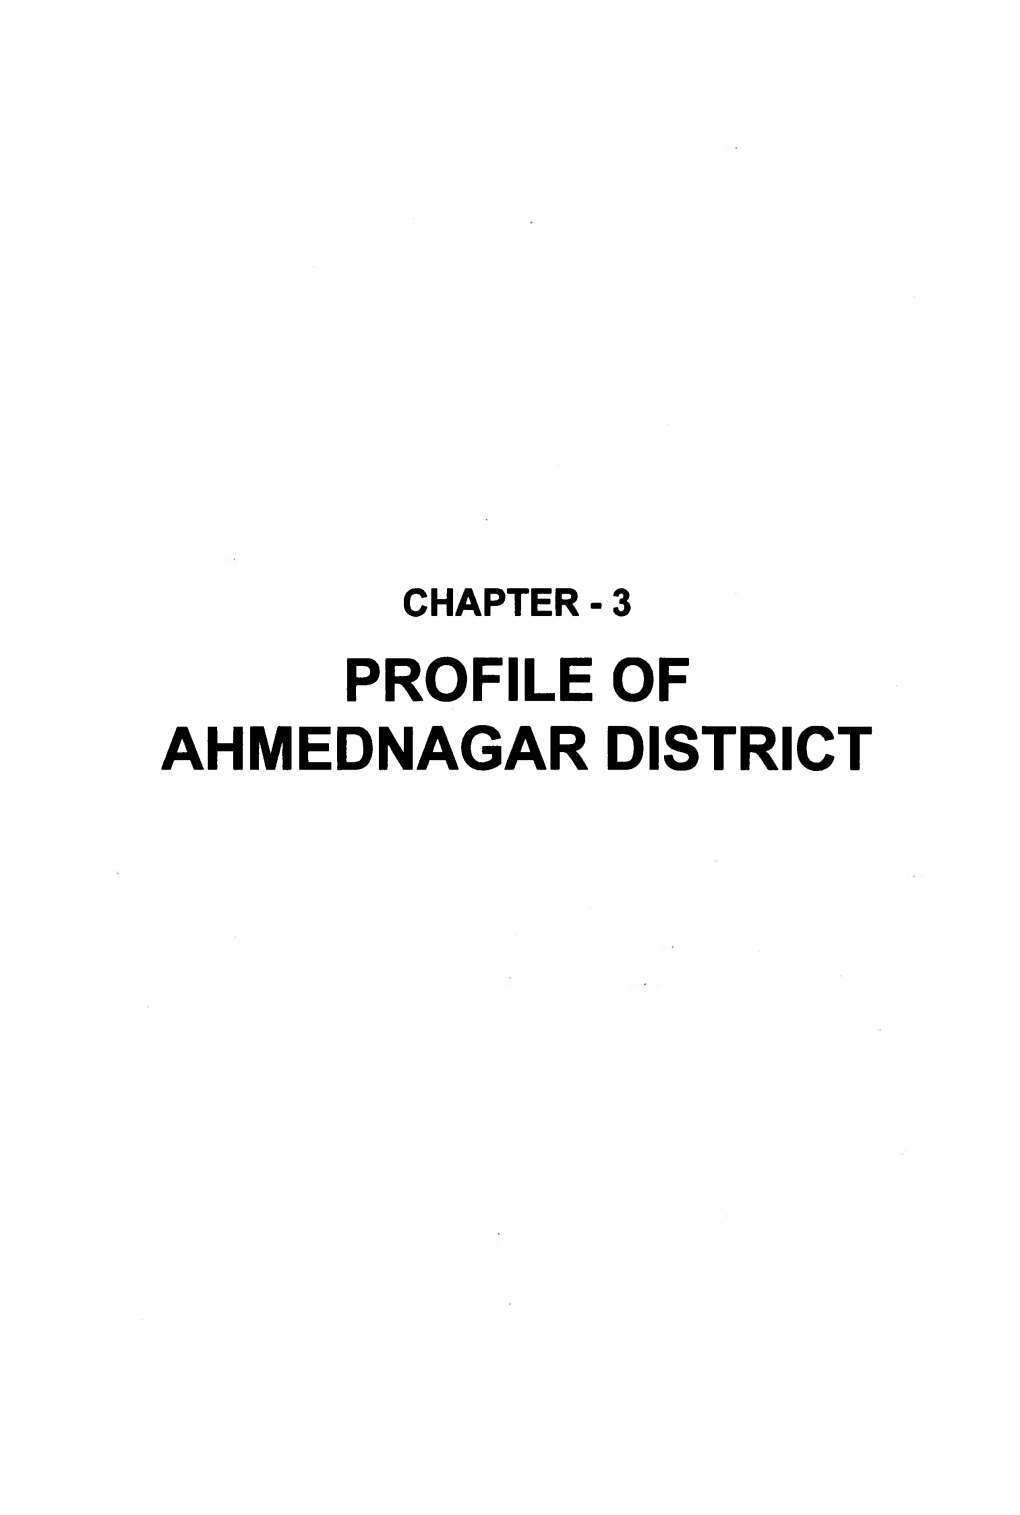 Profile of Ahmednagar District Chapter-3 Profile of Ahmednagar District